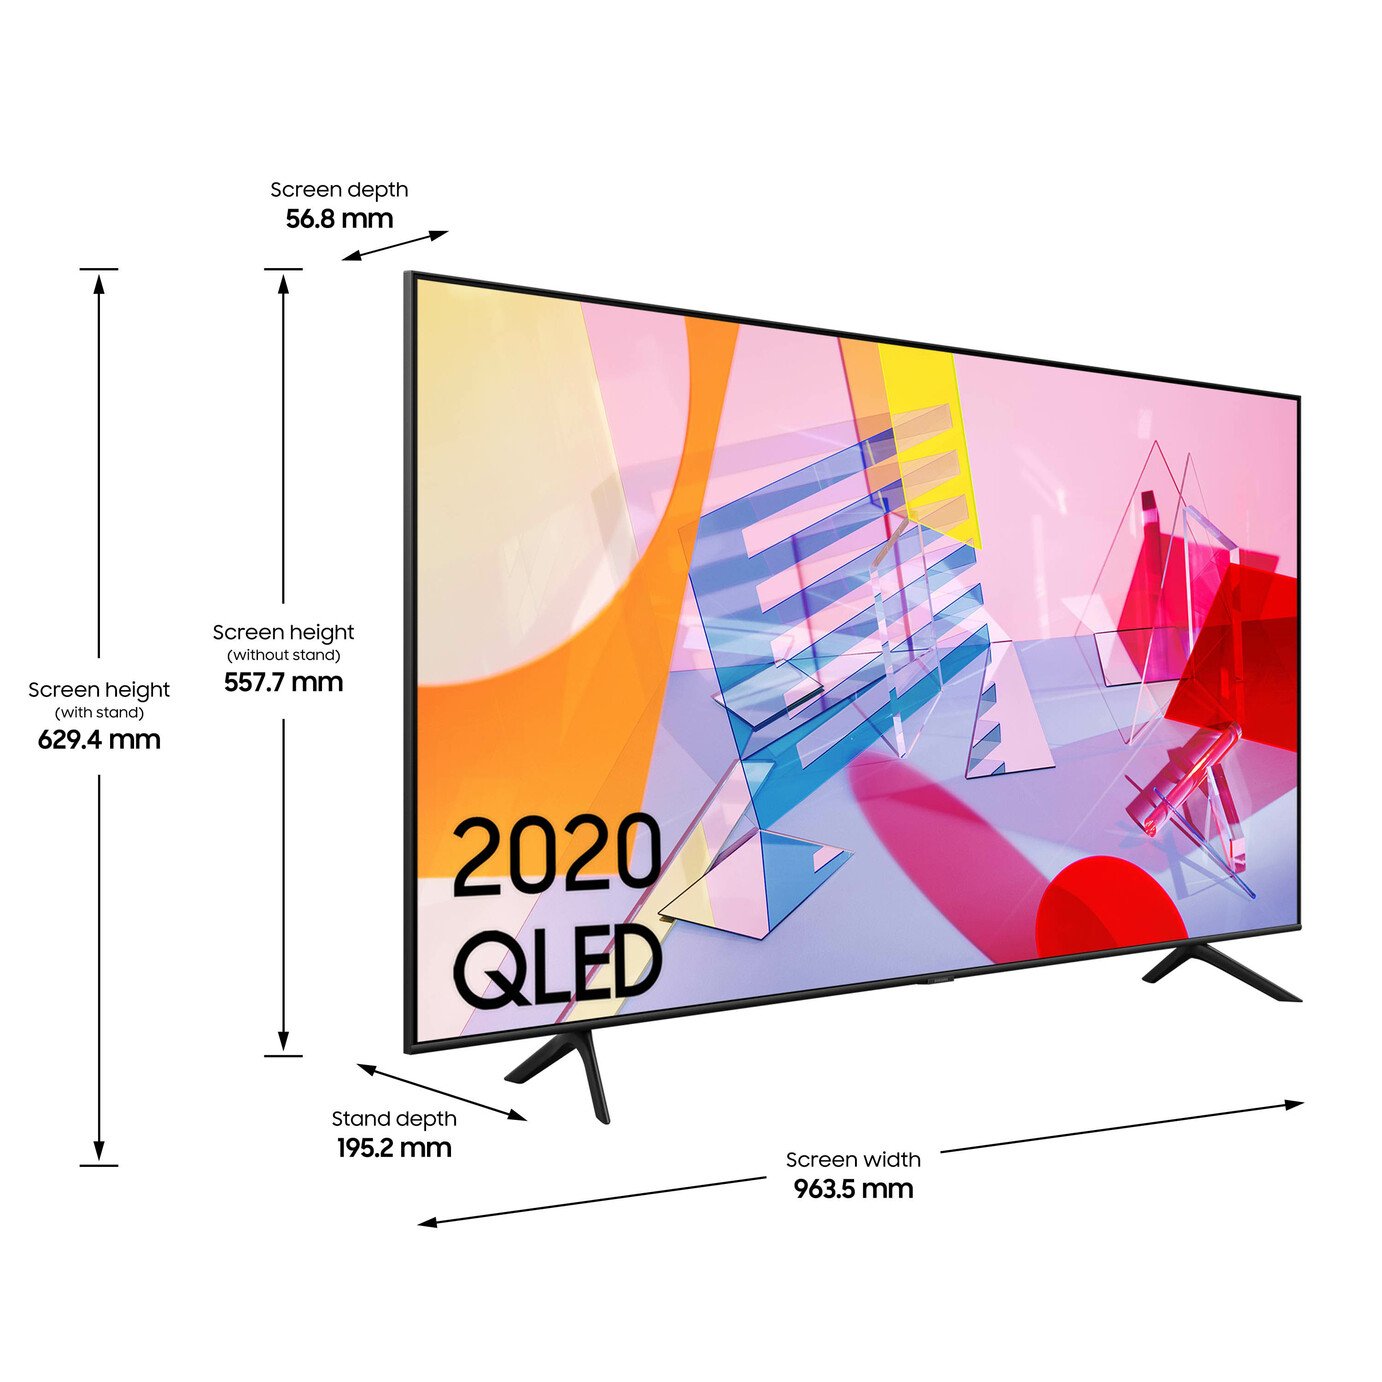 Samsung 43 Inch QE43Q60T Smart Ultra HD QLED TV with HDR Review